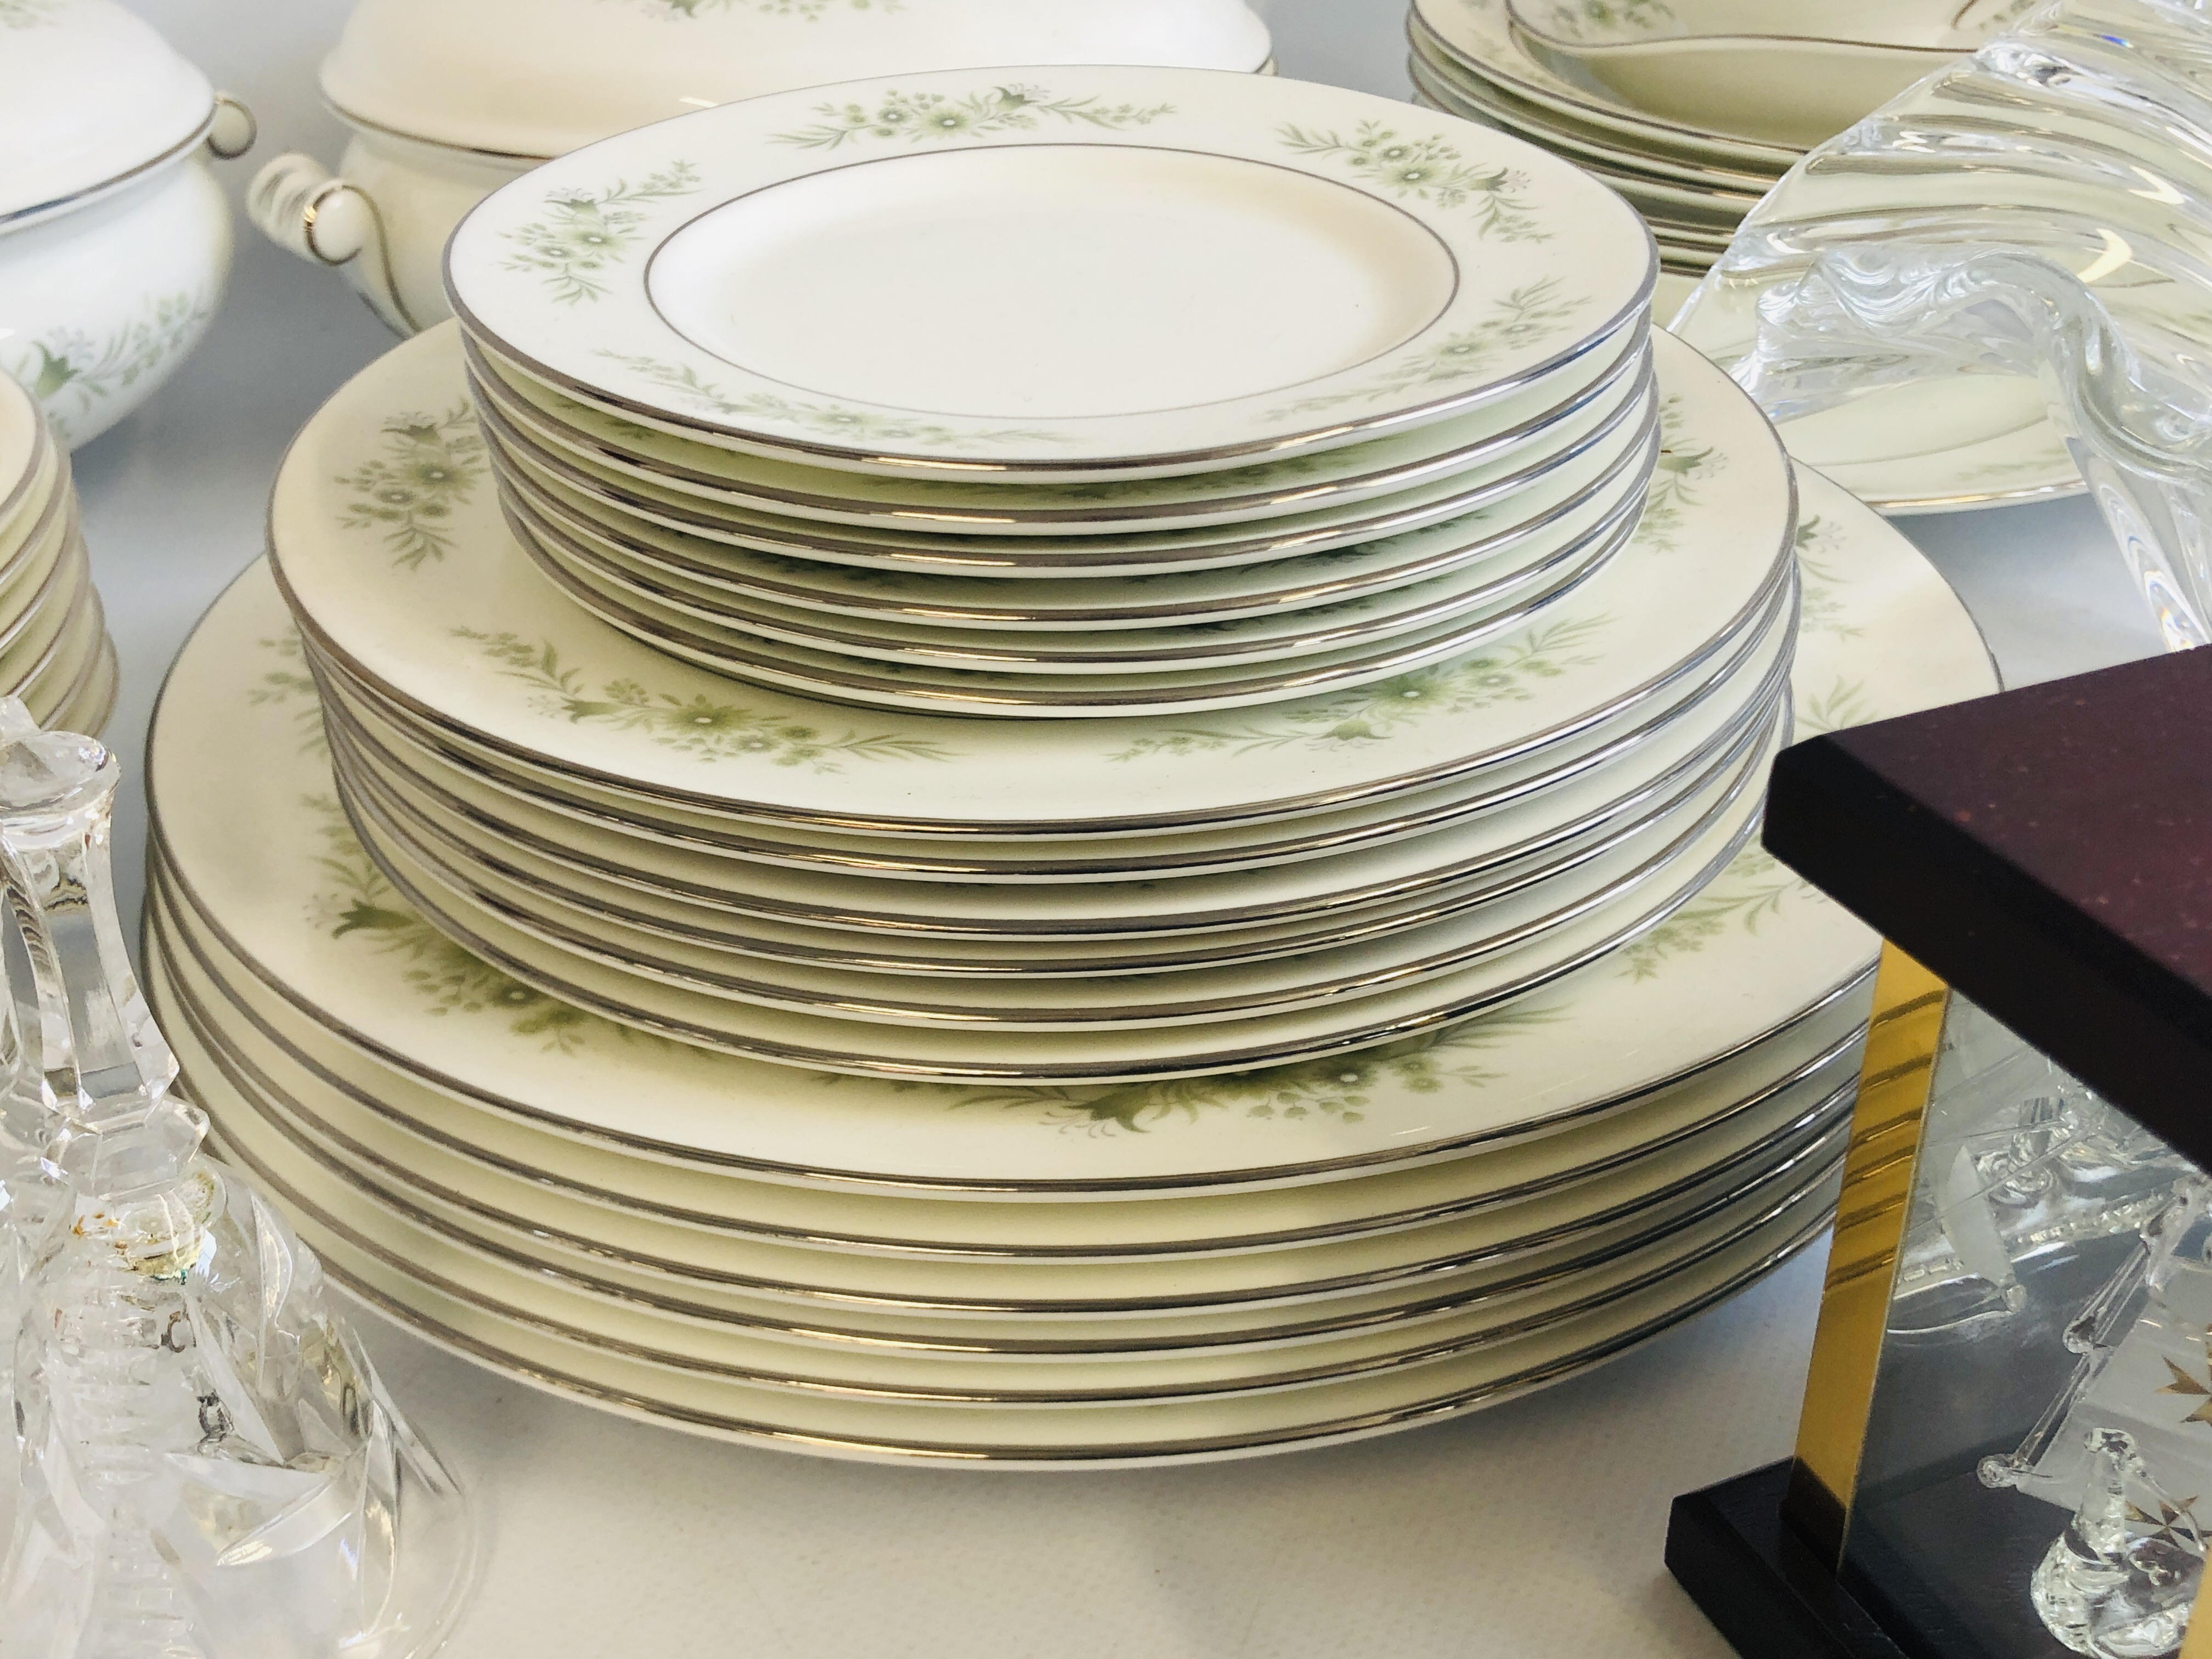 A 35 PIECE SIX PLACE SETTING OF WEDGWOOD WESTBURY BONE CHINA TABLE WARE PLUS A COLLECTION OF GOOD - Image 3 of 13